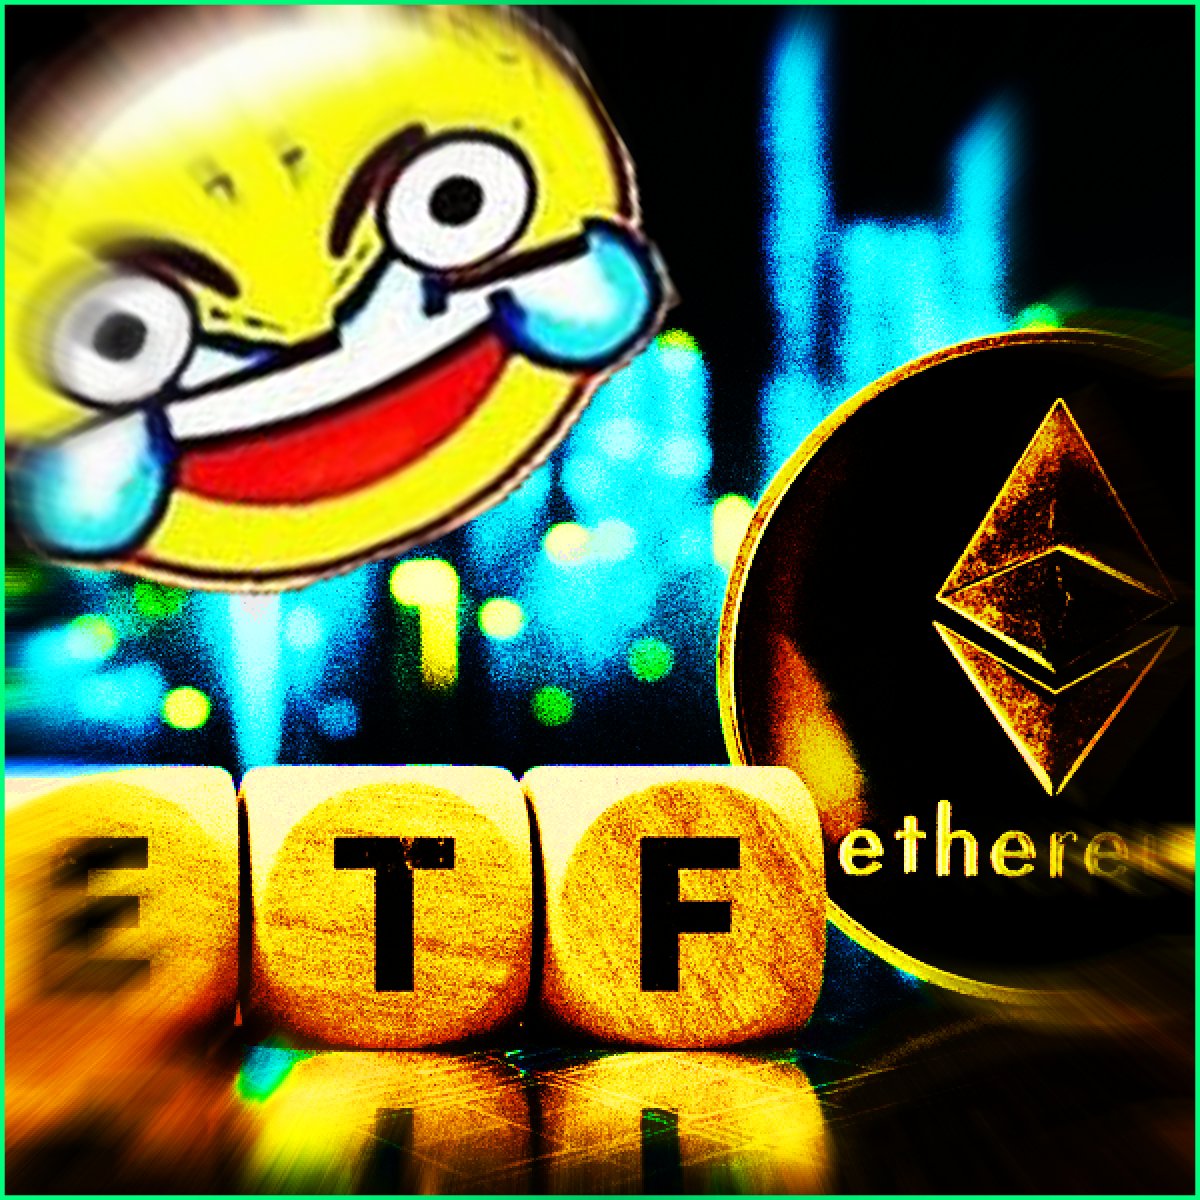 Big week for $ETH as two spot ETF decisions loom:

1. @vaneck_us on May 23rd
2. @ARKInvest on May 24th

Amidst the volatility, trader psychology is split on how to play this event

Let's dive into the differing opinions & unmatched asymmetrical opportunities on Smilee 🧵